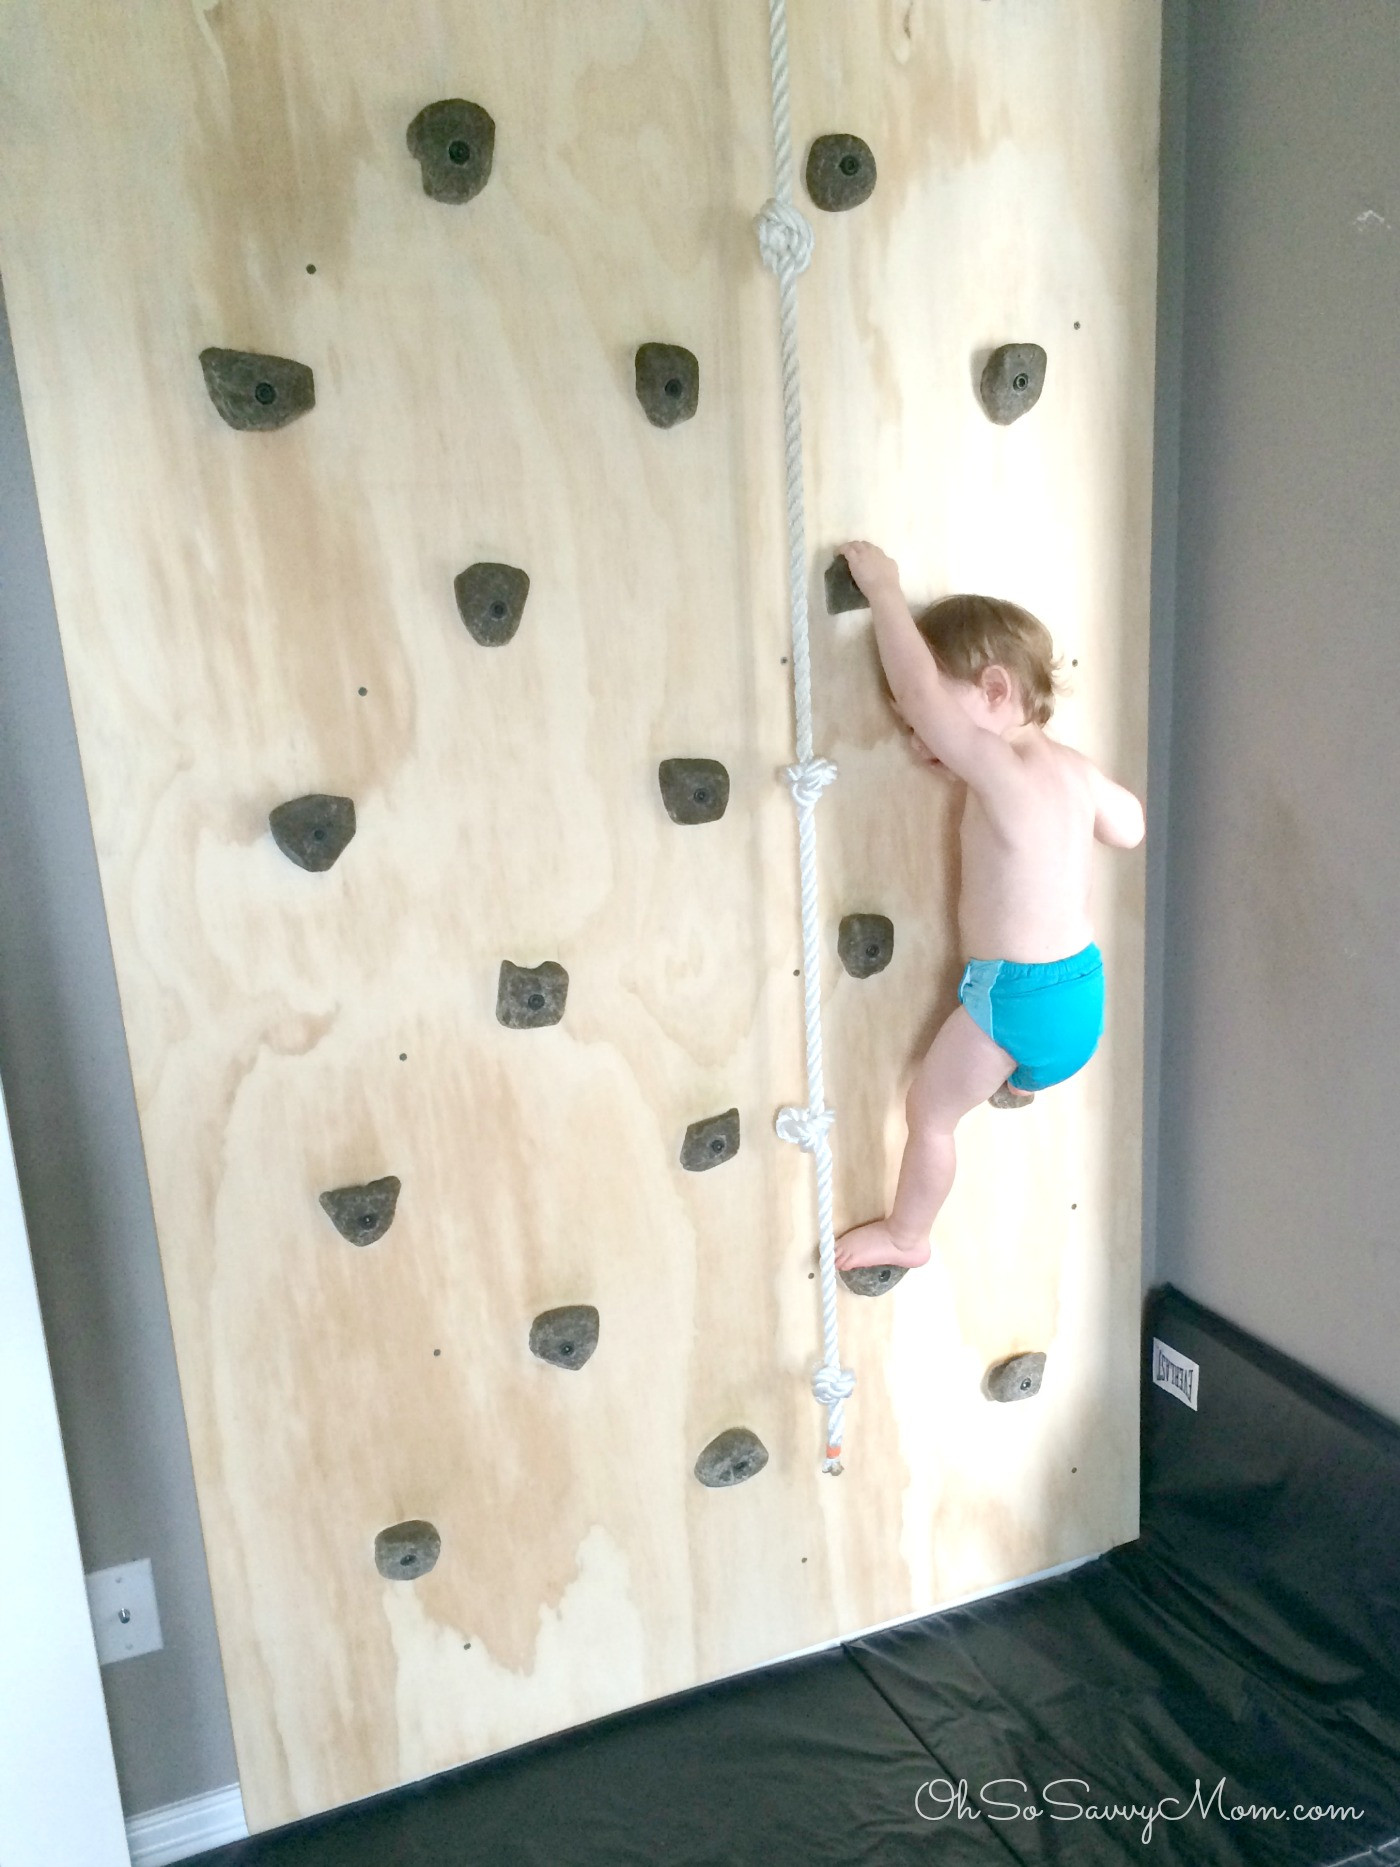 DIY Climbing Wall For Toddlers
 How to build a DIY Kids Climbing Wall Easy to Follow